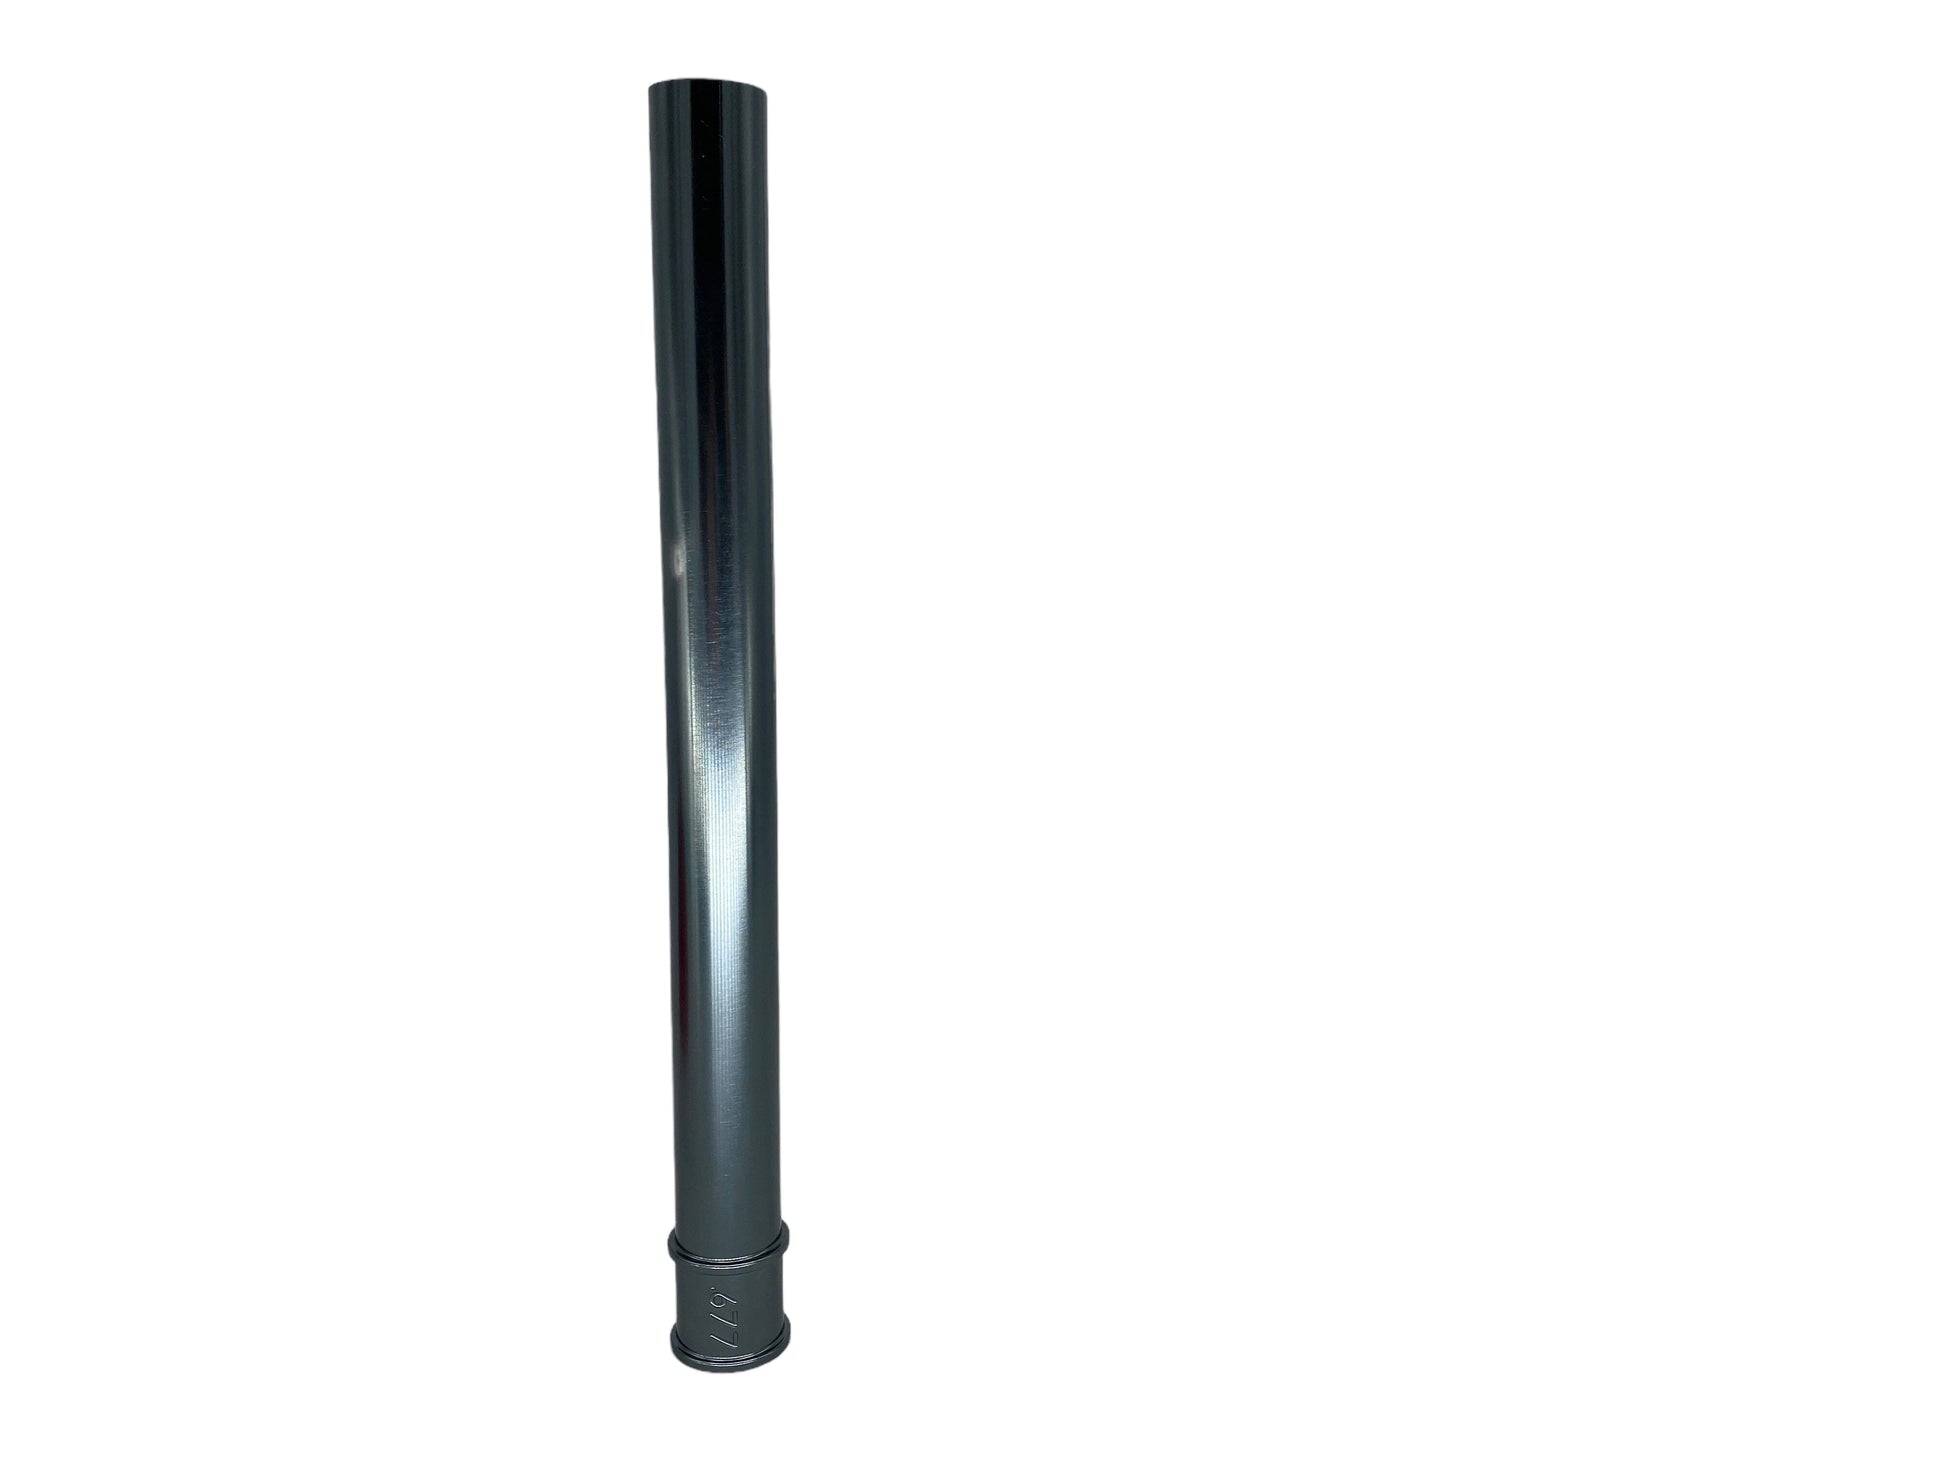 Used Planet Eclipse Shaft S63 PWR Barrel Insert .677 Paintball Gun from CPXBrosPaintball Buy/Sell/Trade Paintball Markers, Paintball Hoppers, Paintball Masks, and Hormesis Headbands